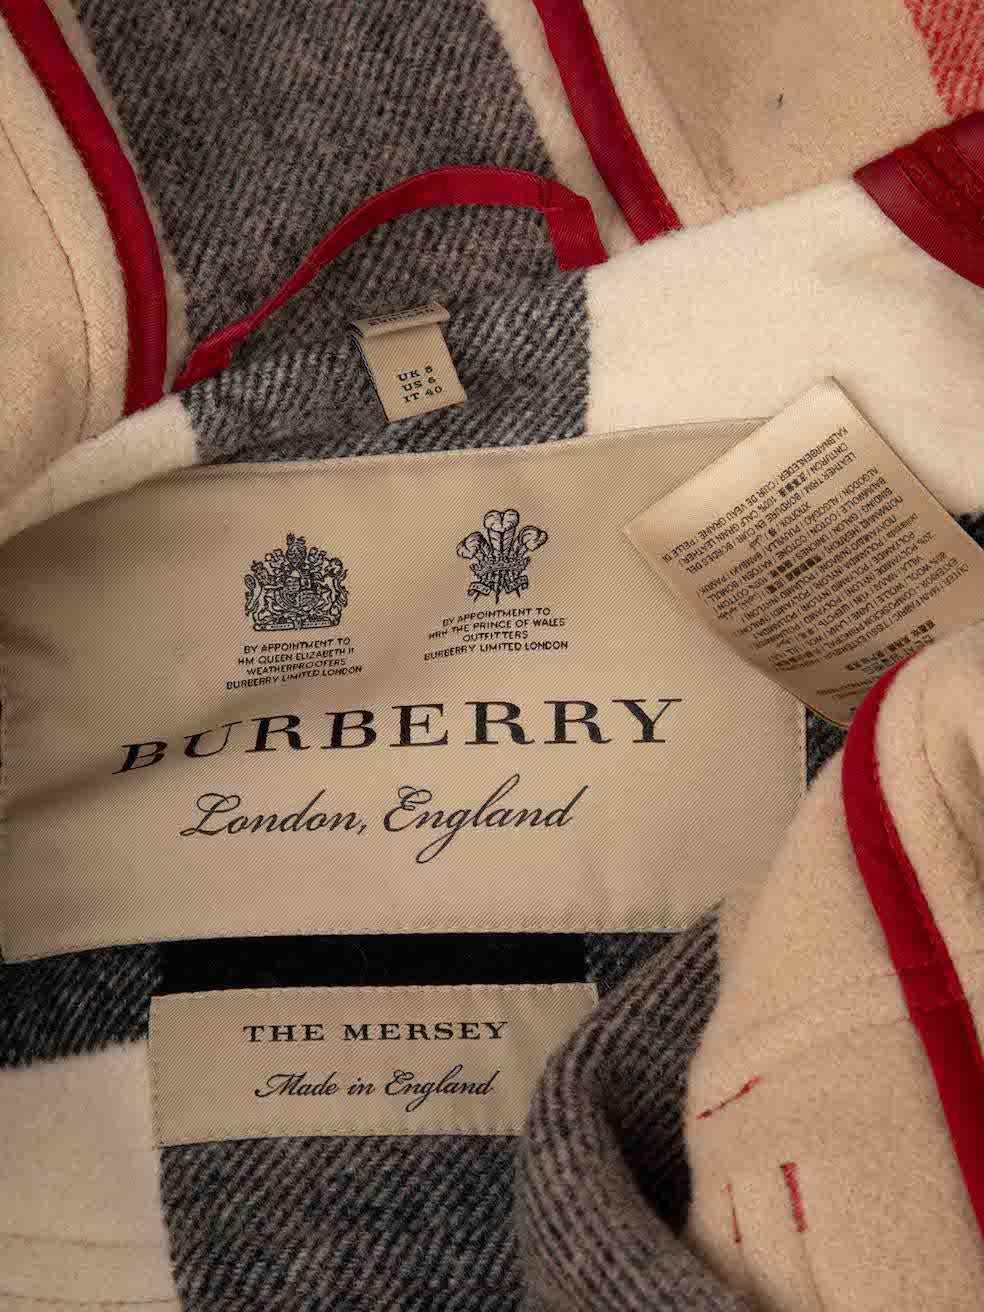 Manteau The Mersey Burberry rouge taille S en vente 1